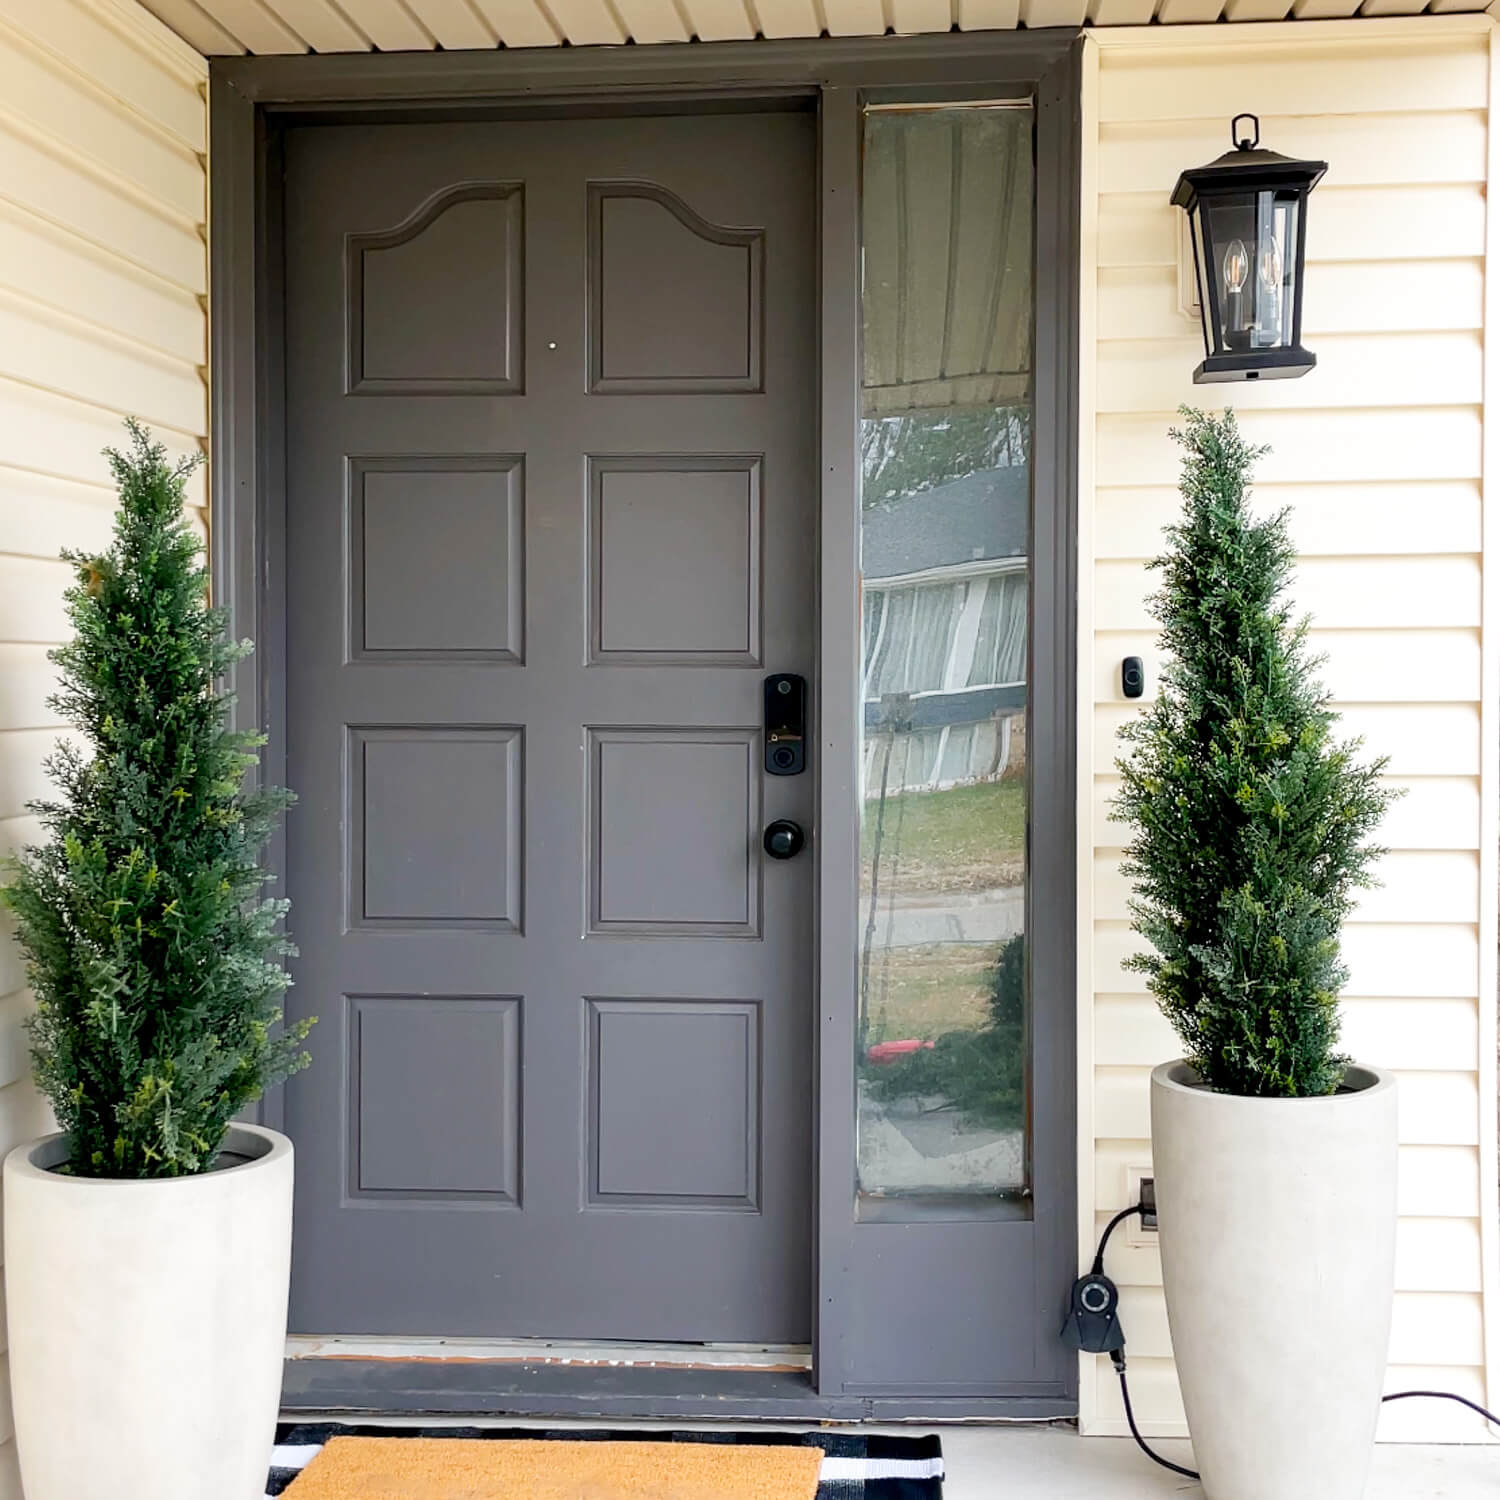 A guide on how to paint a front door.